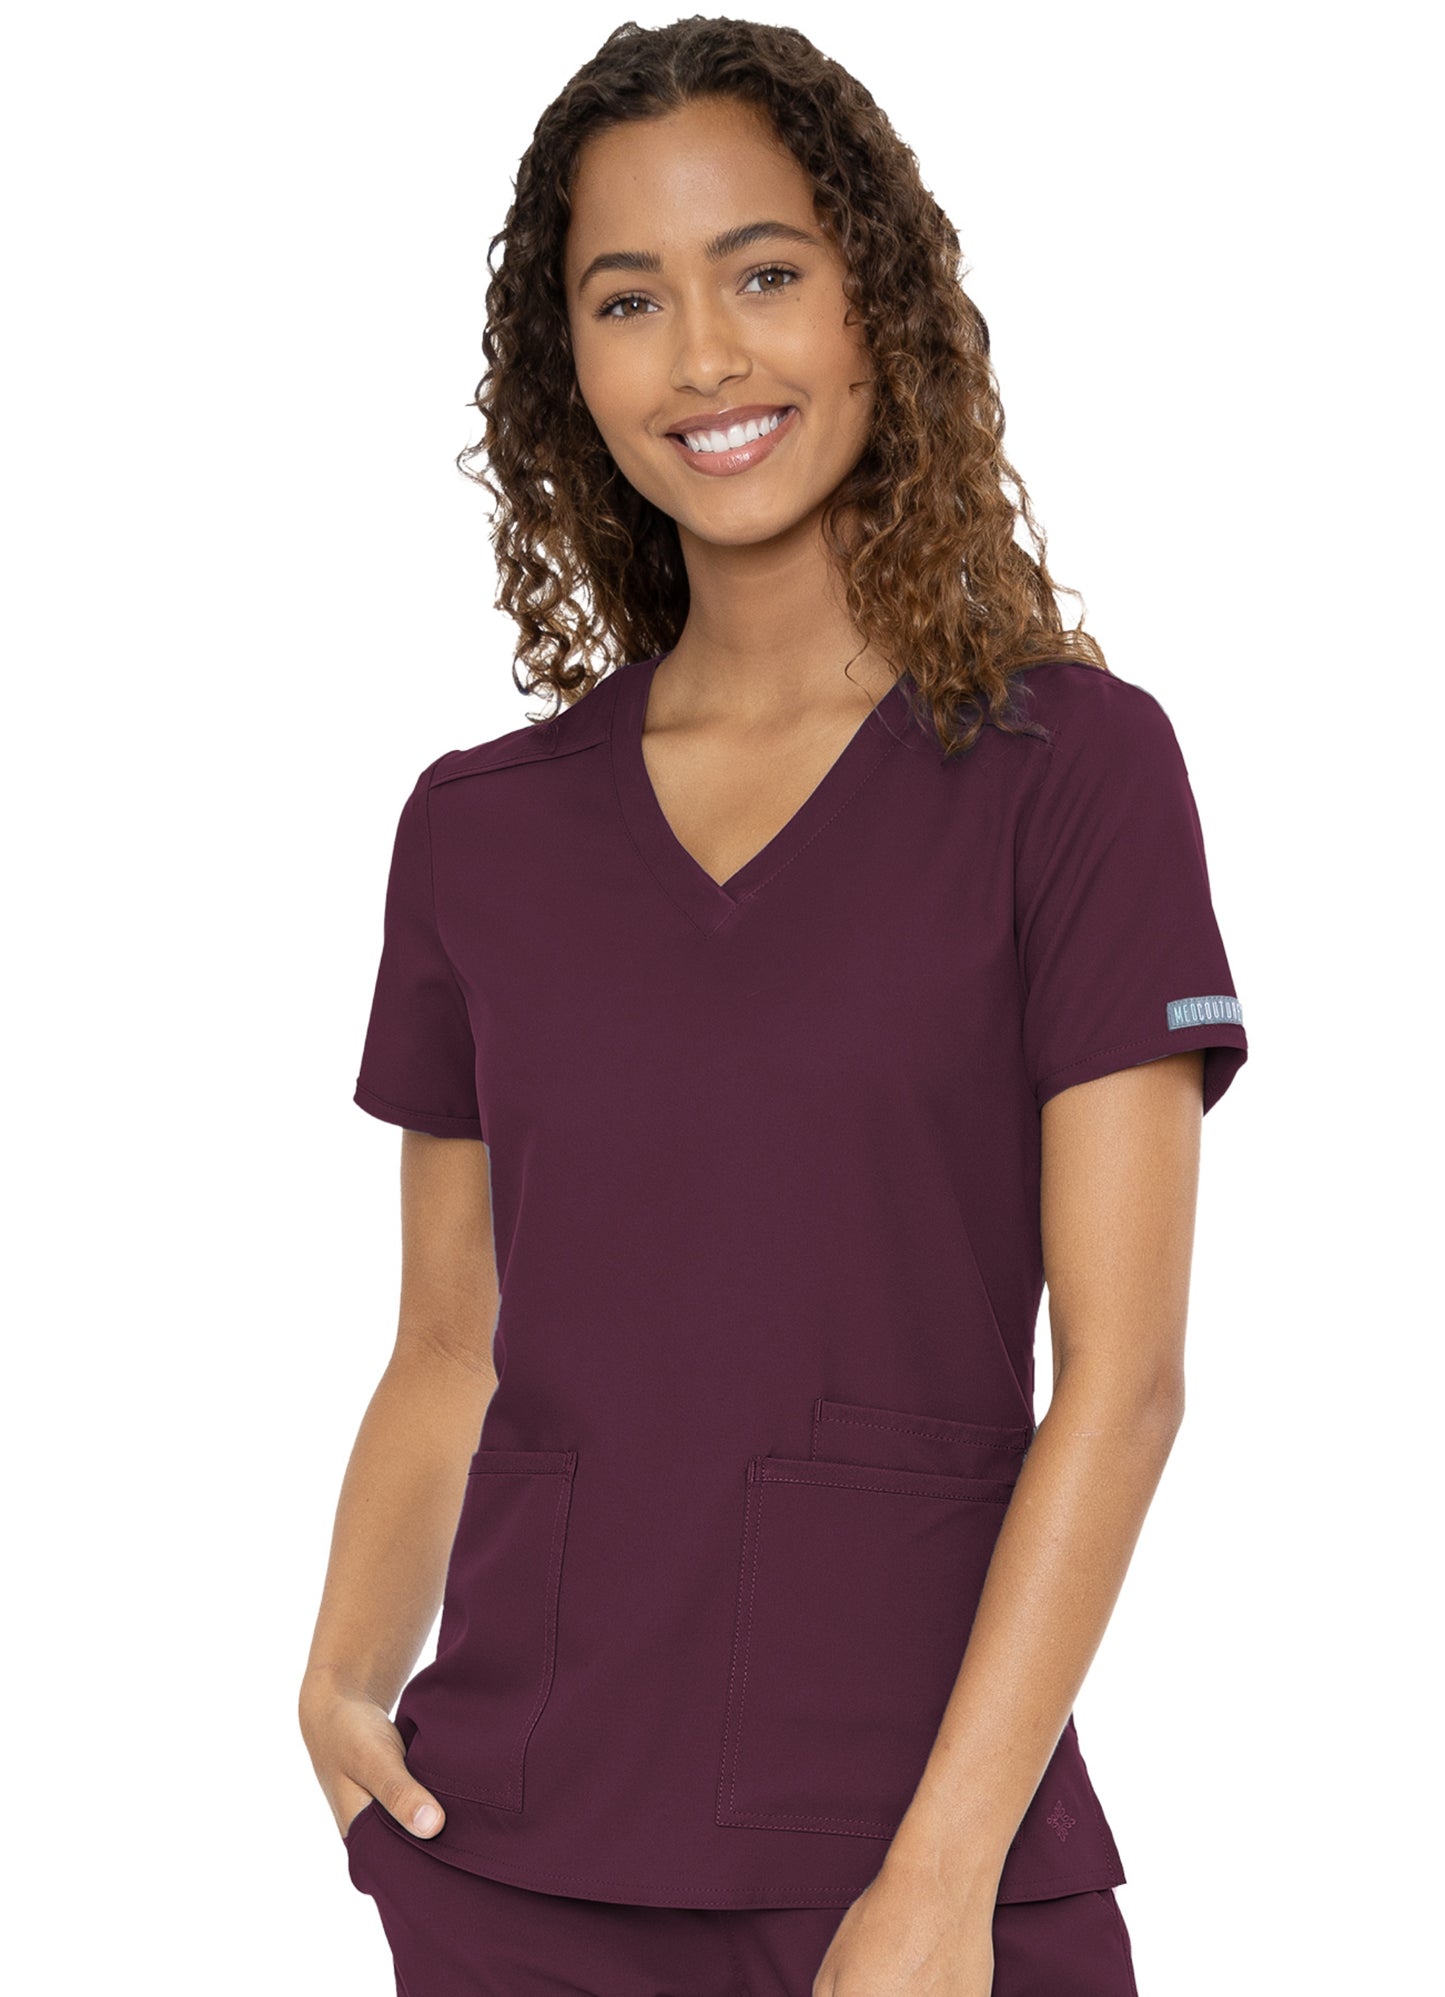 Med Couture 3 Pocket Top, My Favorite Scrubs 